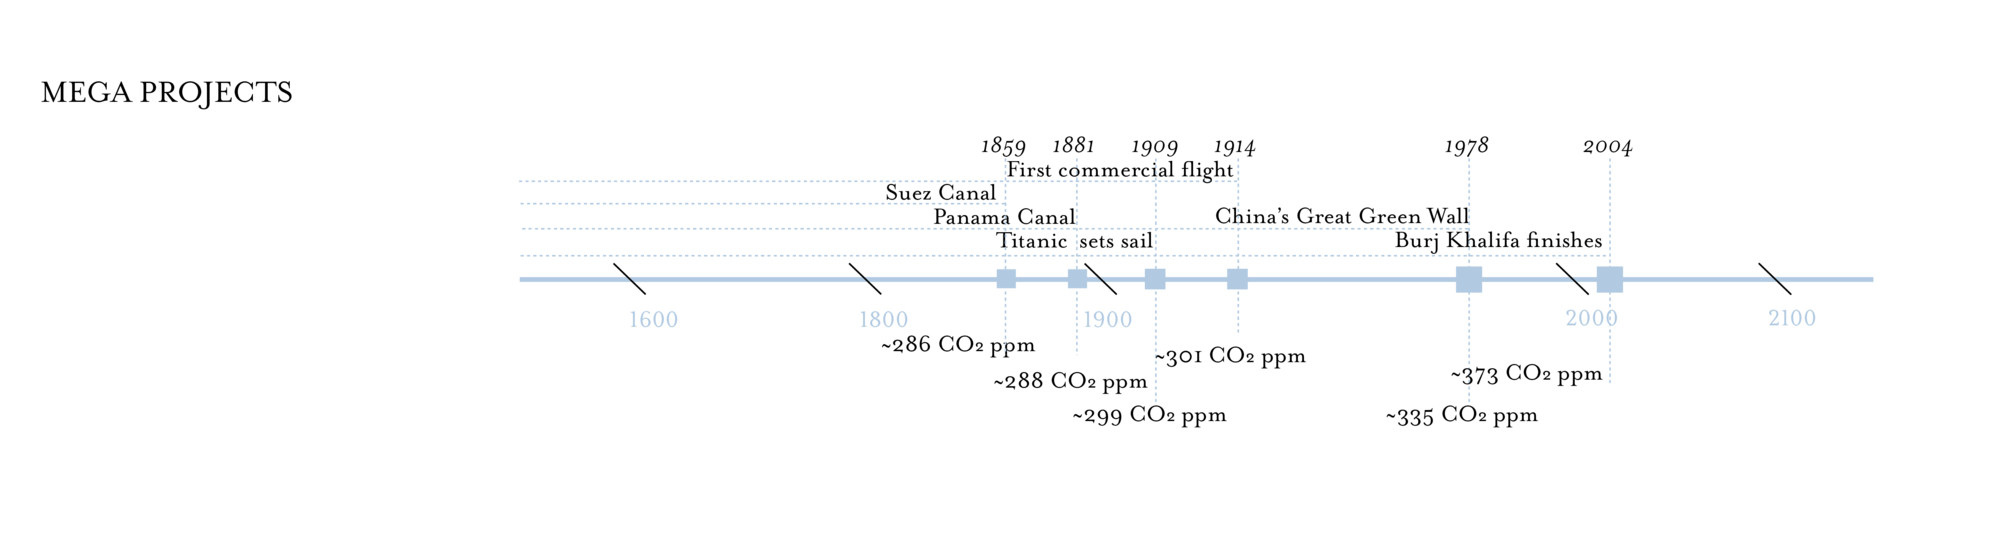 Megainfrastructure projects over time